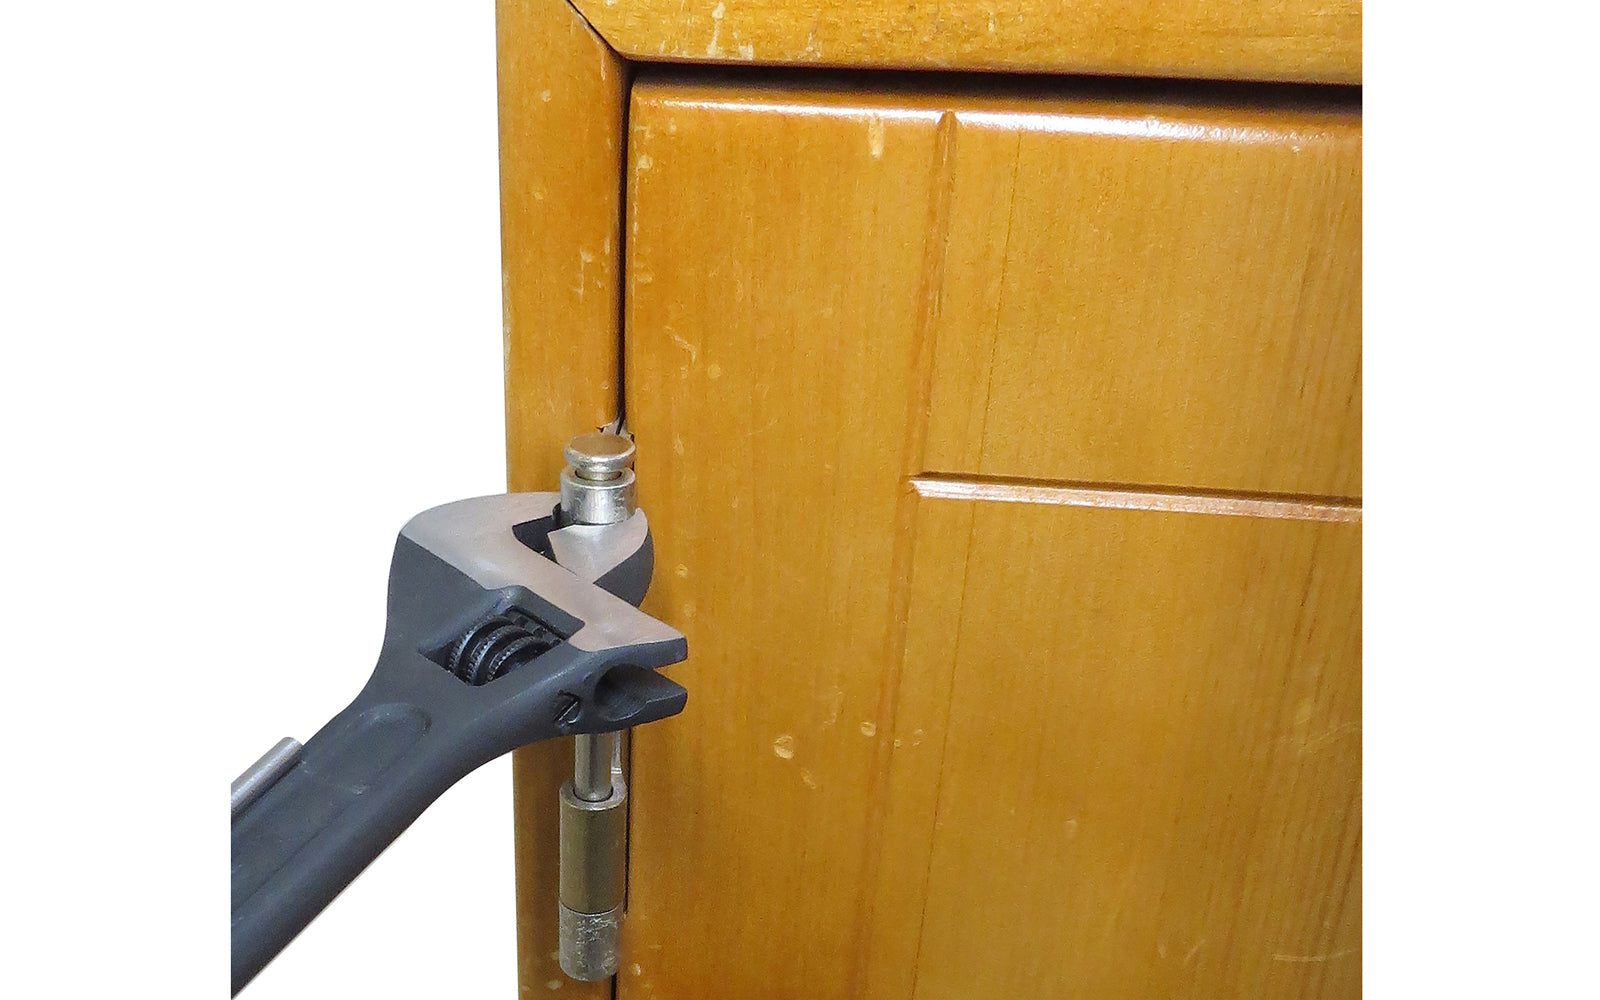 FastCap Knuckle Bender - Allows you to quickly adjust any sagging door - Specialty adjustment jaw - Hinge pin remover on tool